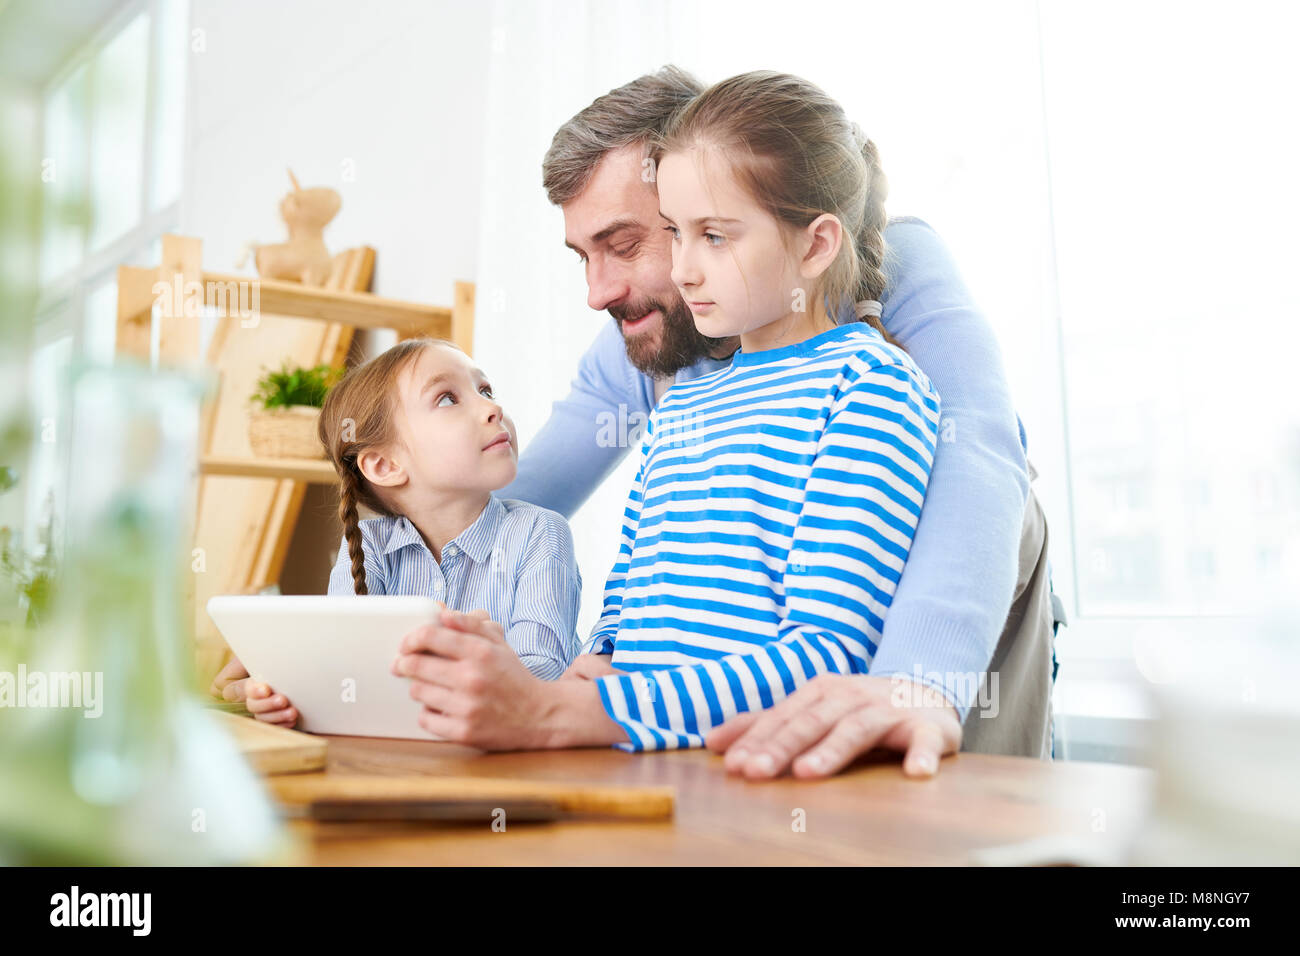 Caring Father Stock Photo